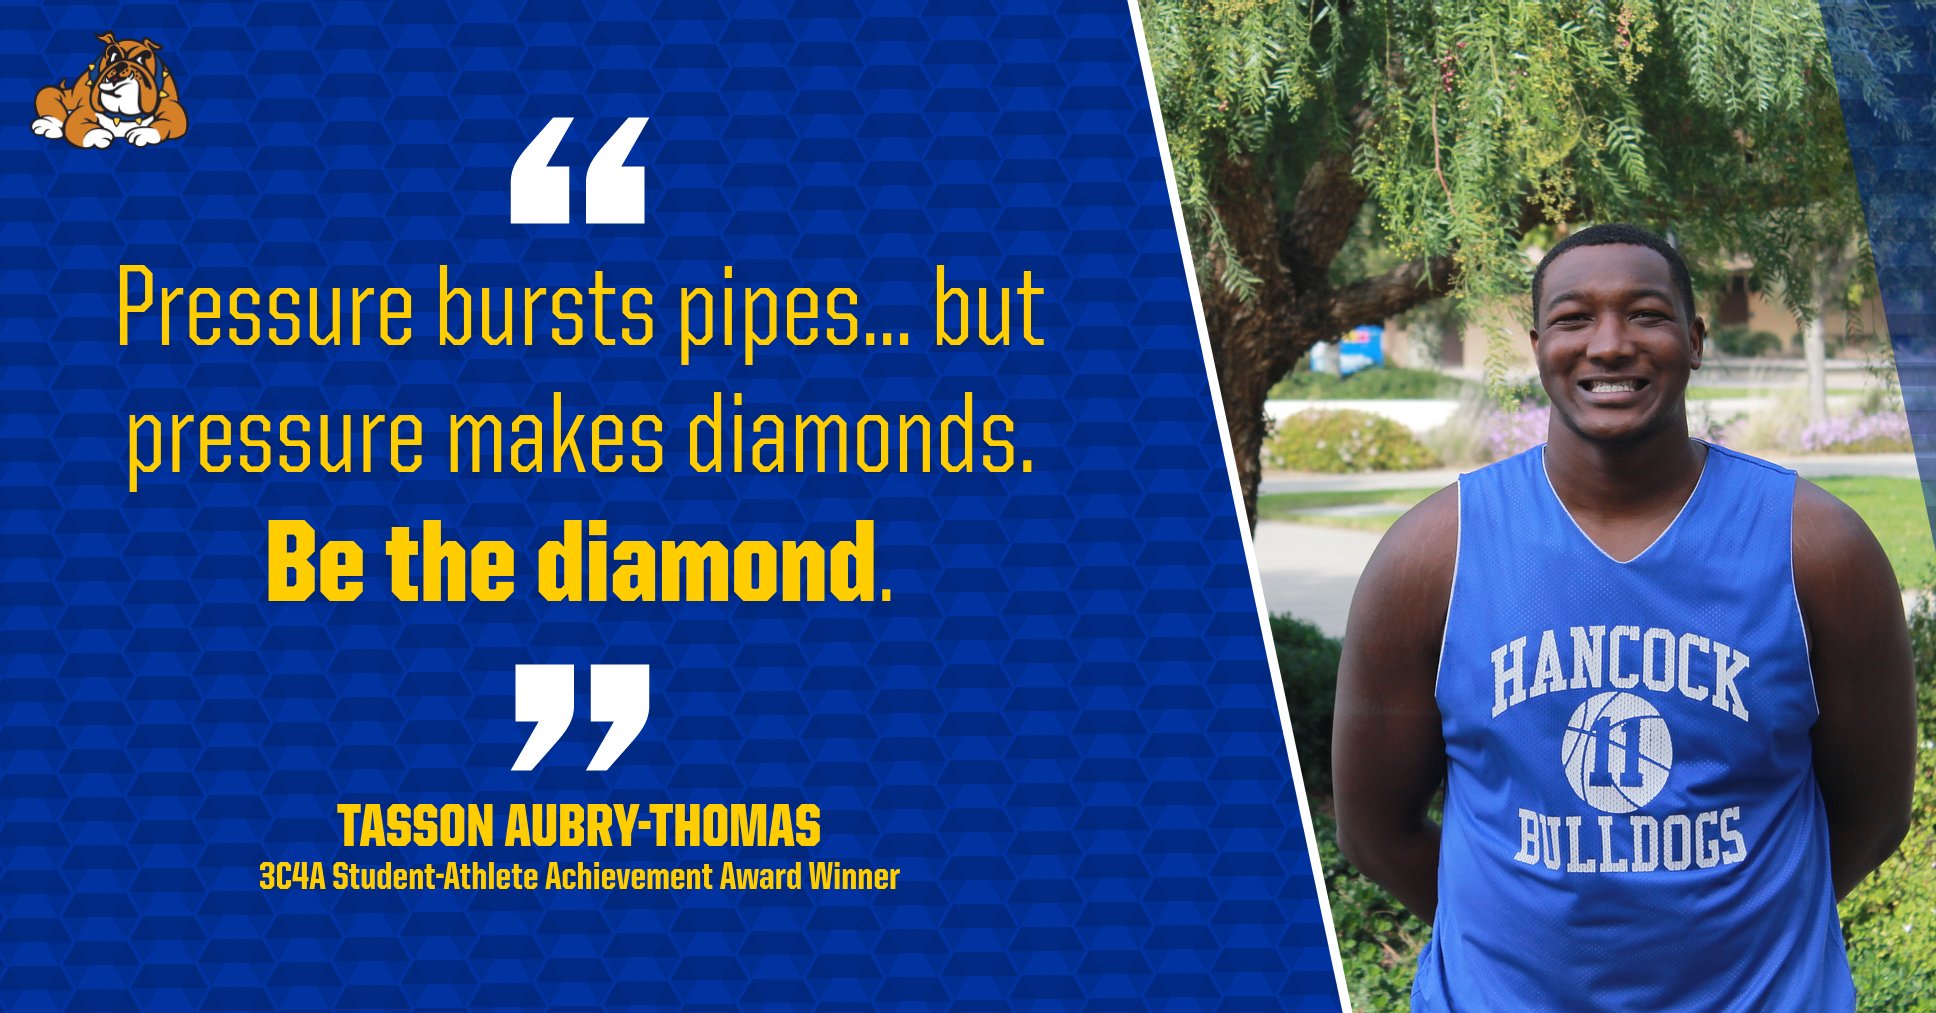 Overcoming the Odds: Aubry-Thomas Named 3C4A Student-Athlete Achievement Award Winner